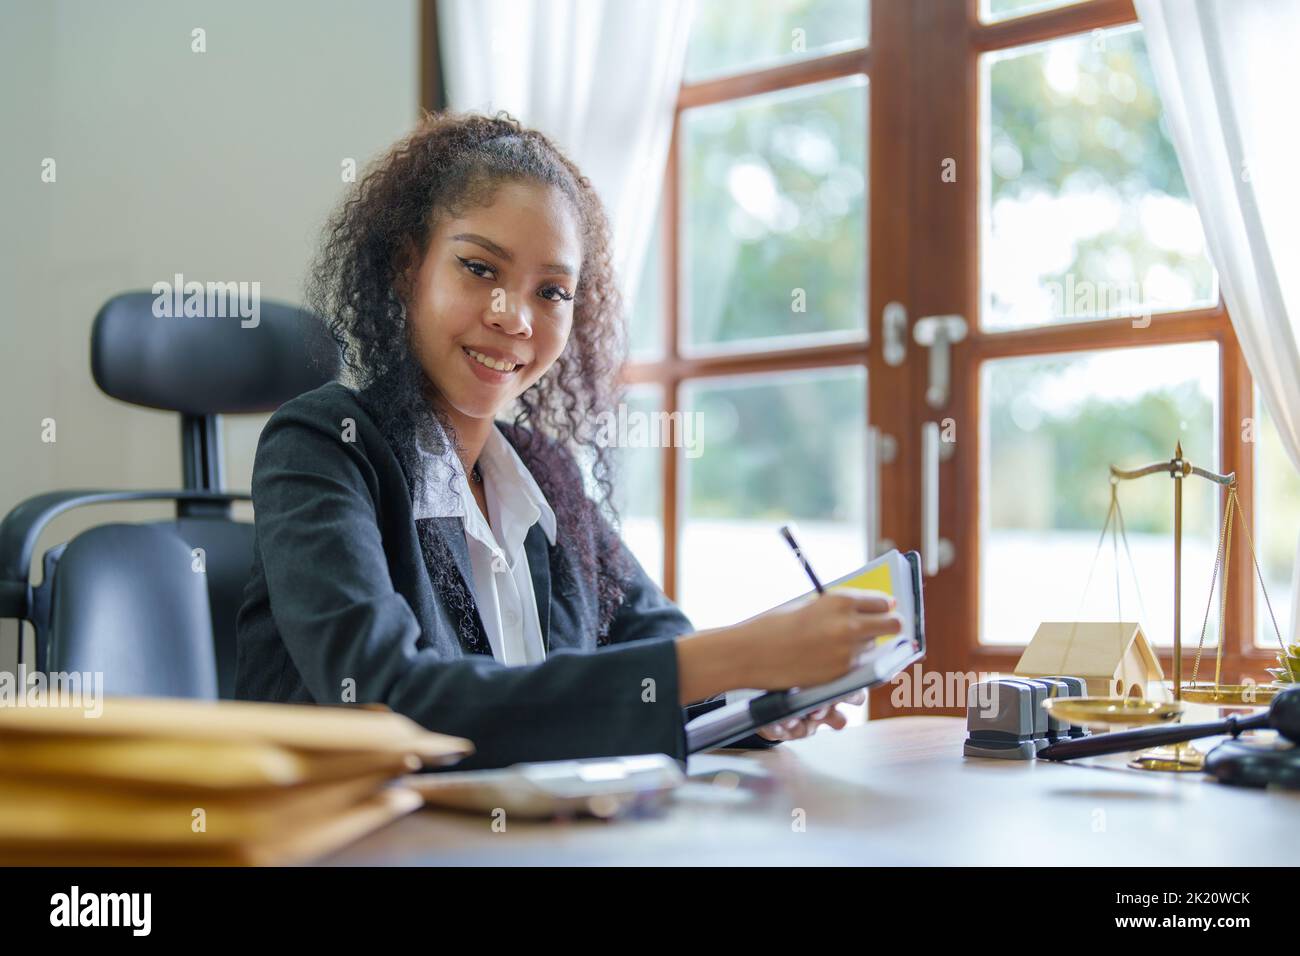 Portrait of an African Americans female lawyer using a notebook to keep track of her work schedule. Stock Photo